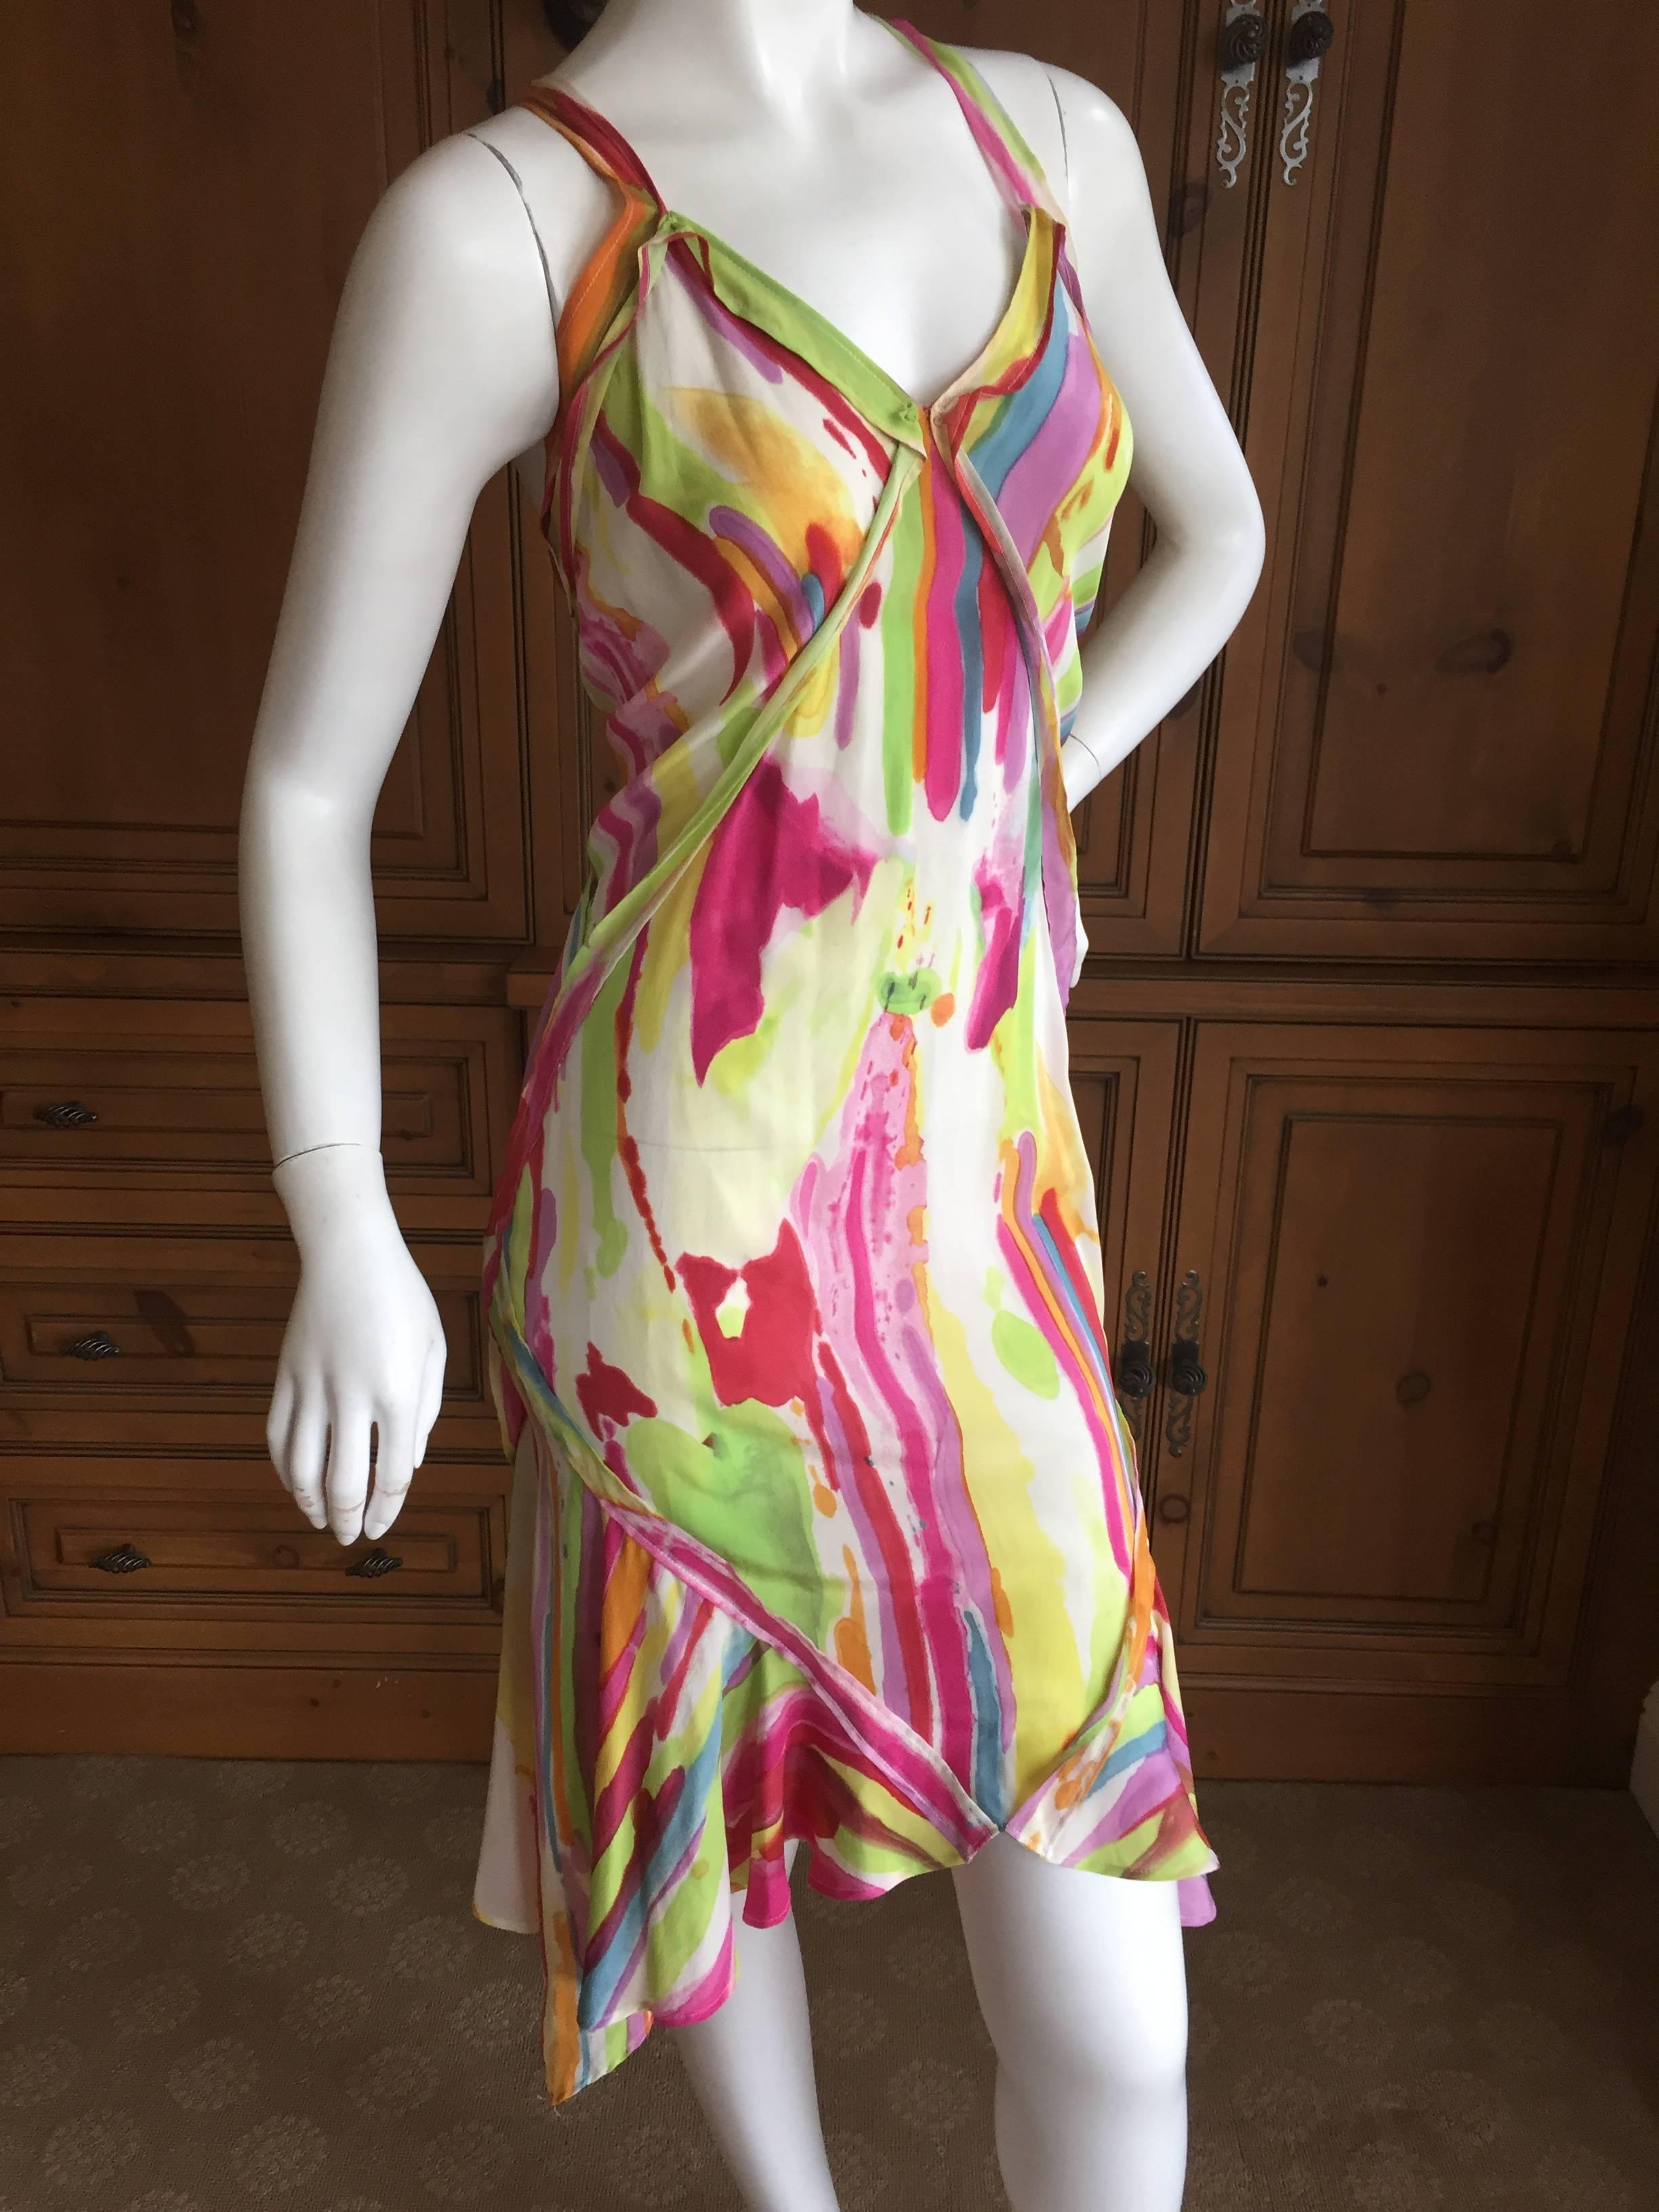 Colorful silk dress from Yves Saint Laurent Rive Guache .
I'm not  certain if this is Tom Ford or Stephano Pilati.
No size tag, Size Small
Bust 36